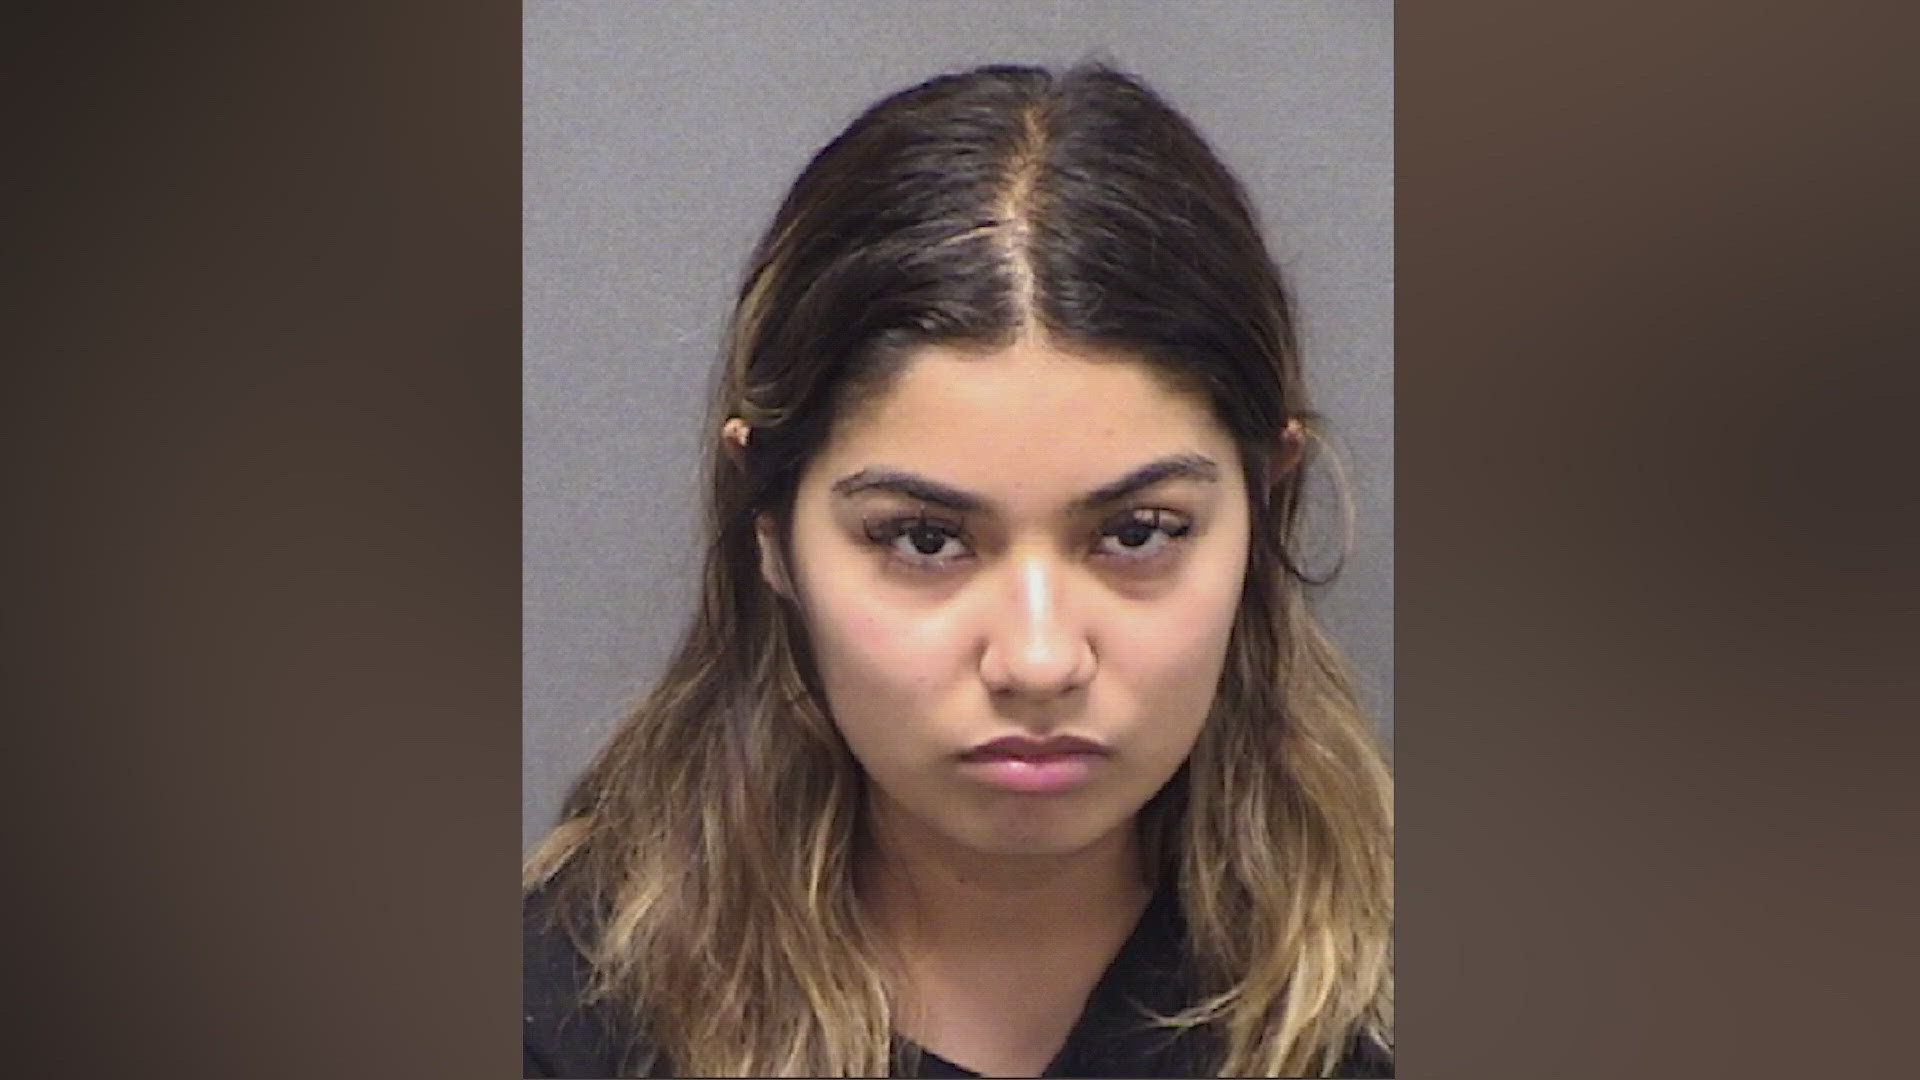 H-E-B employee bomb threats, coworkers disturbing of photos sending accused to